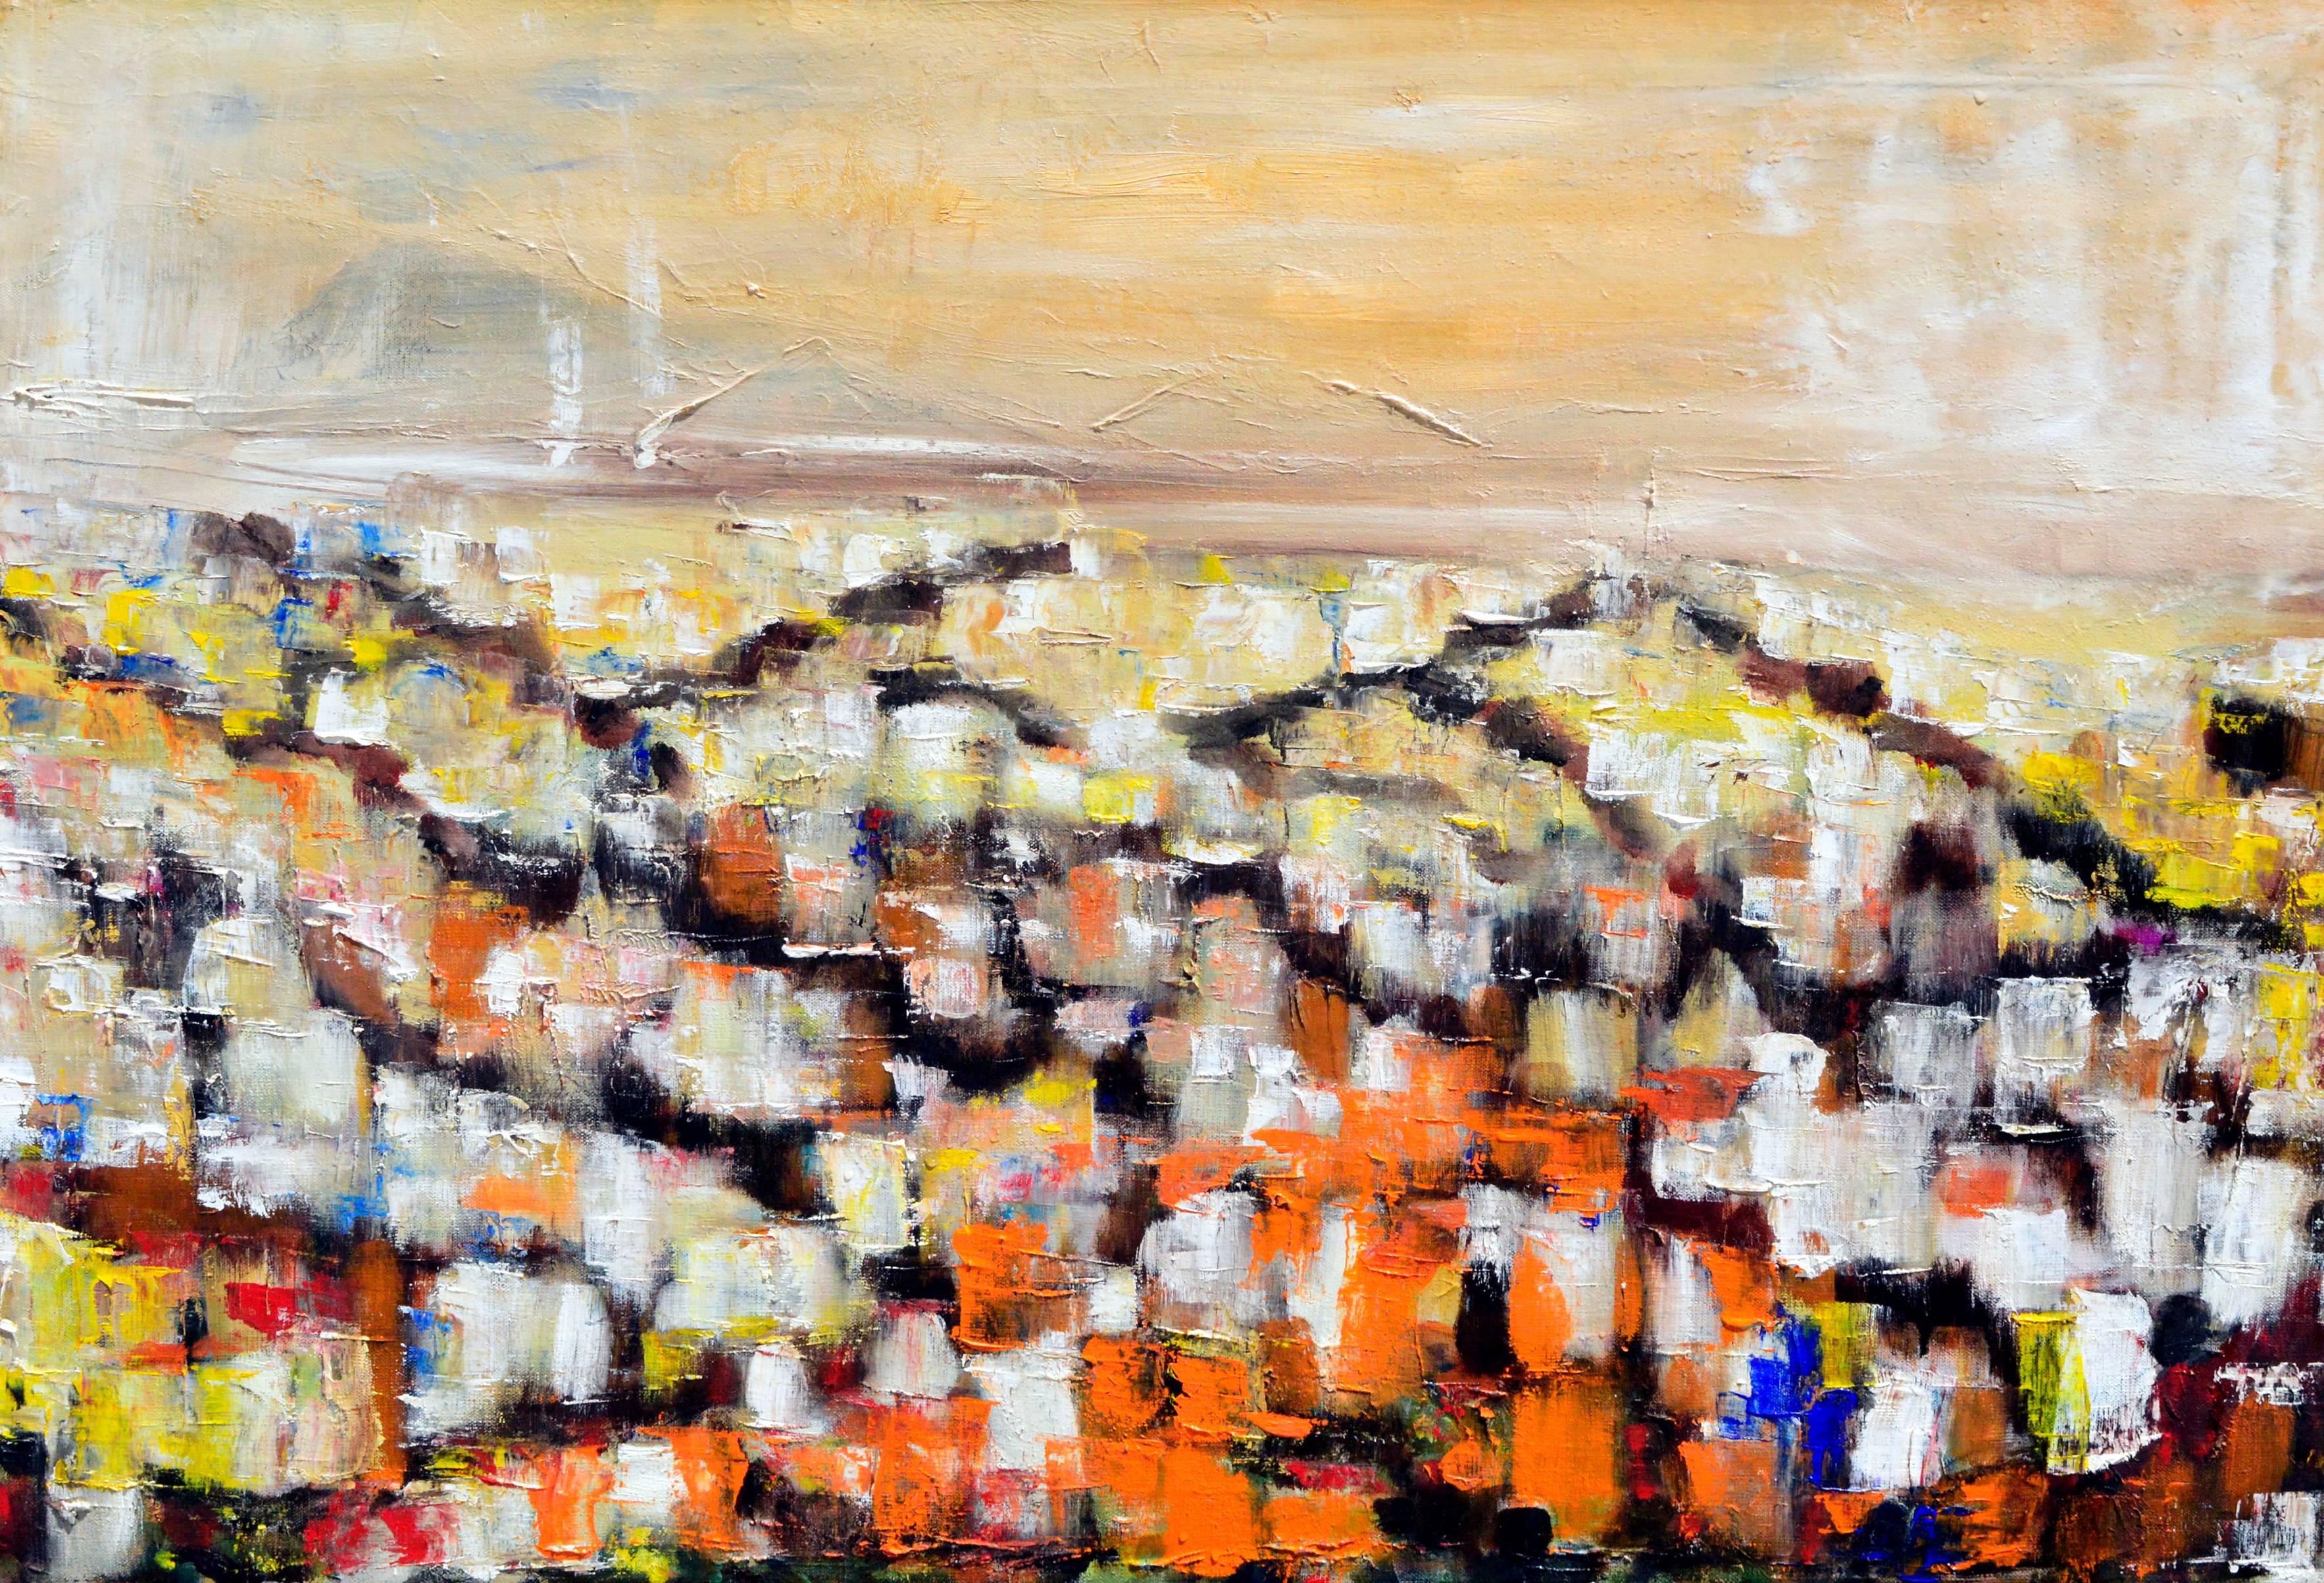 Mid Century Modern Abstract Landscape - San Francisco Hills in the Fog